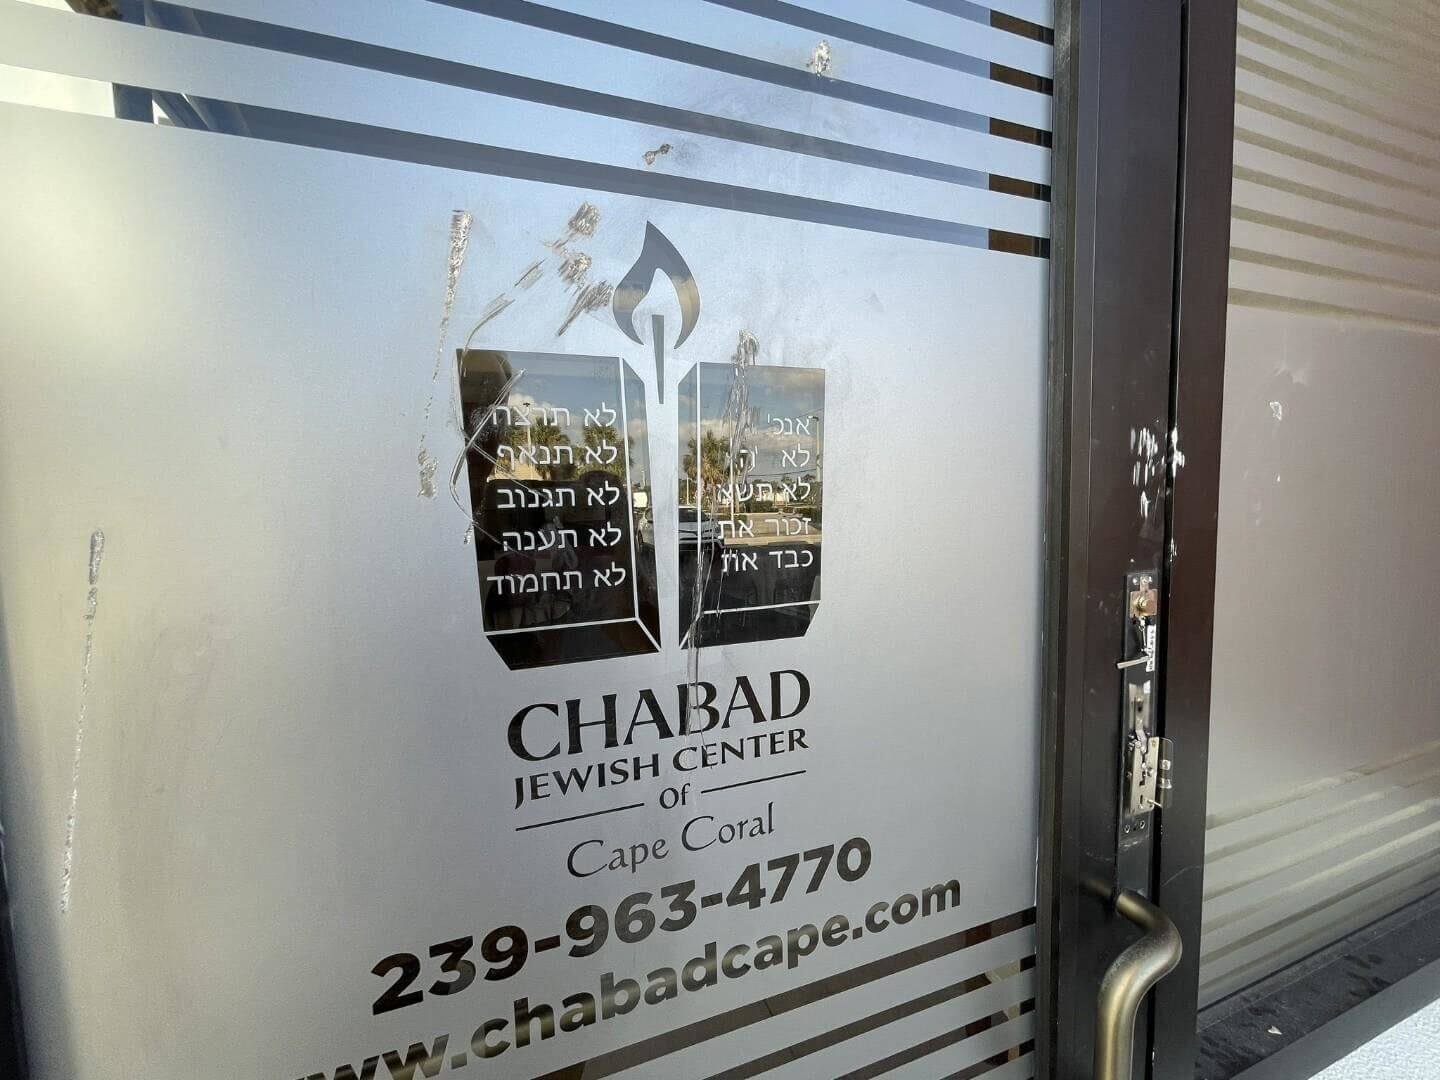 A synagogue in Cape Coral, Florida, was vandalized by a man who hurled stones or bricks against glass and damaged the rabbi's car after morning Shabbat services.